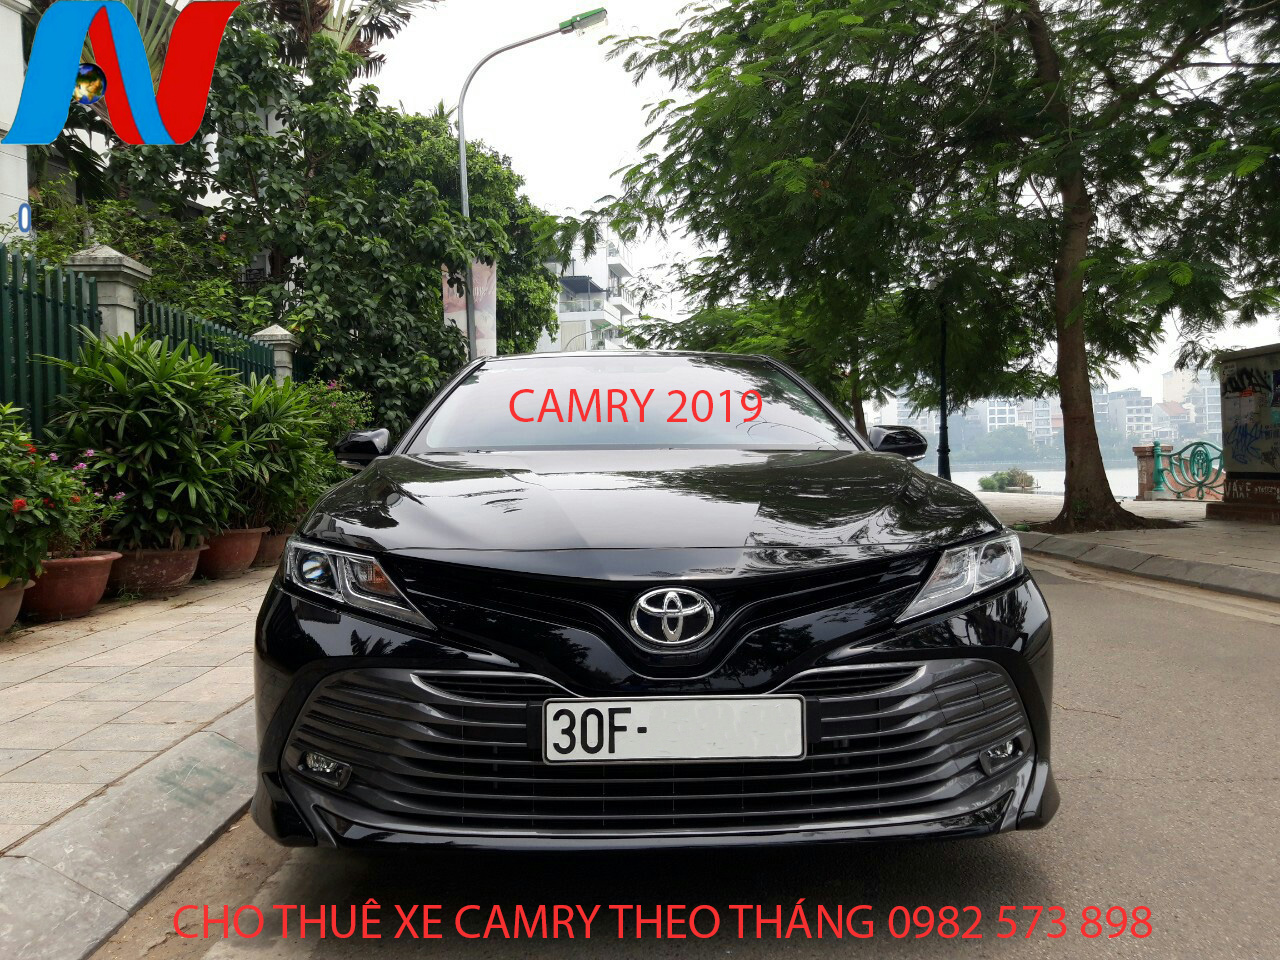 thue xe camry 2019